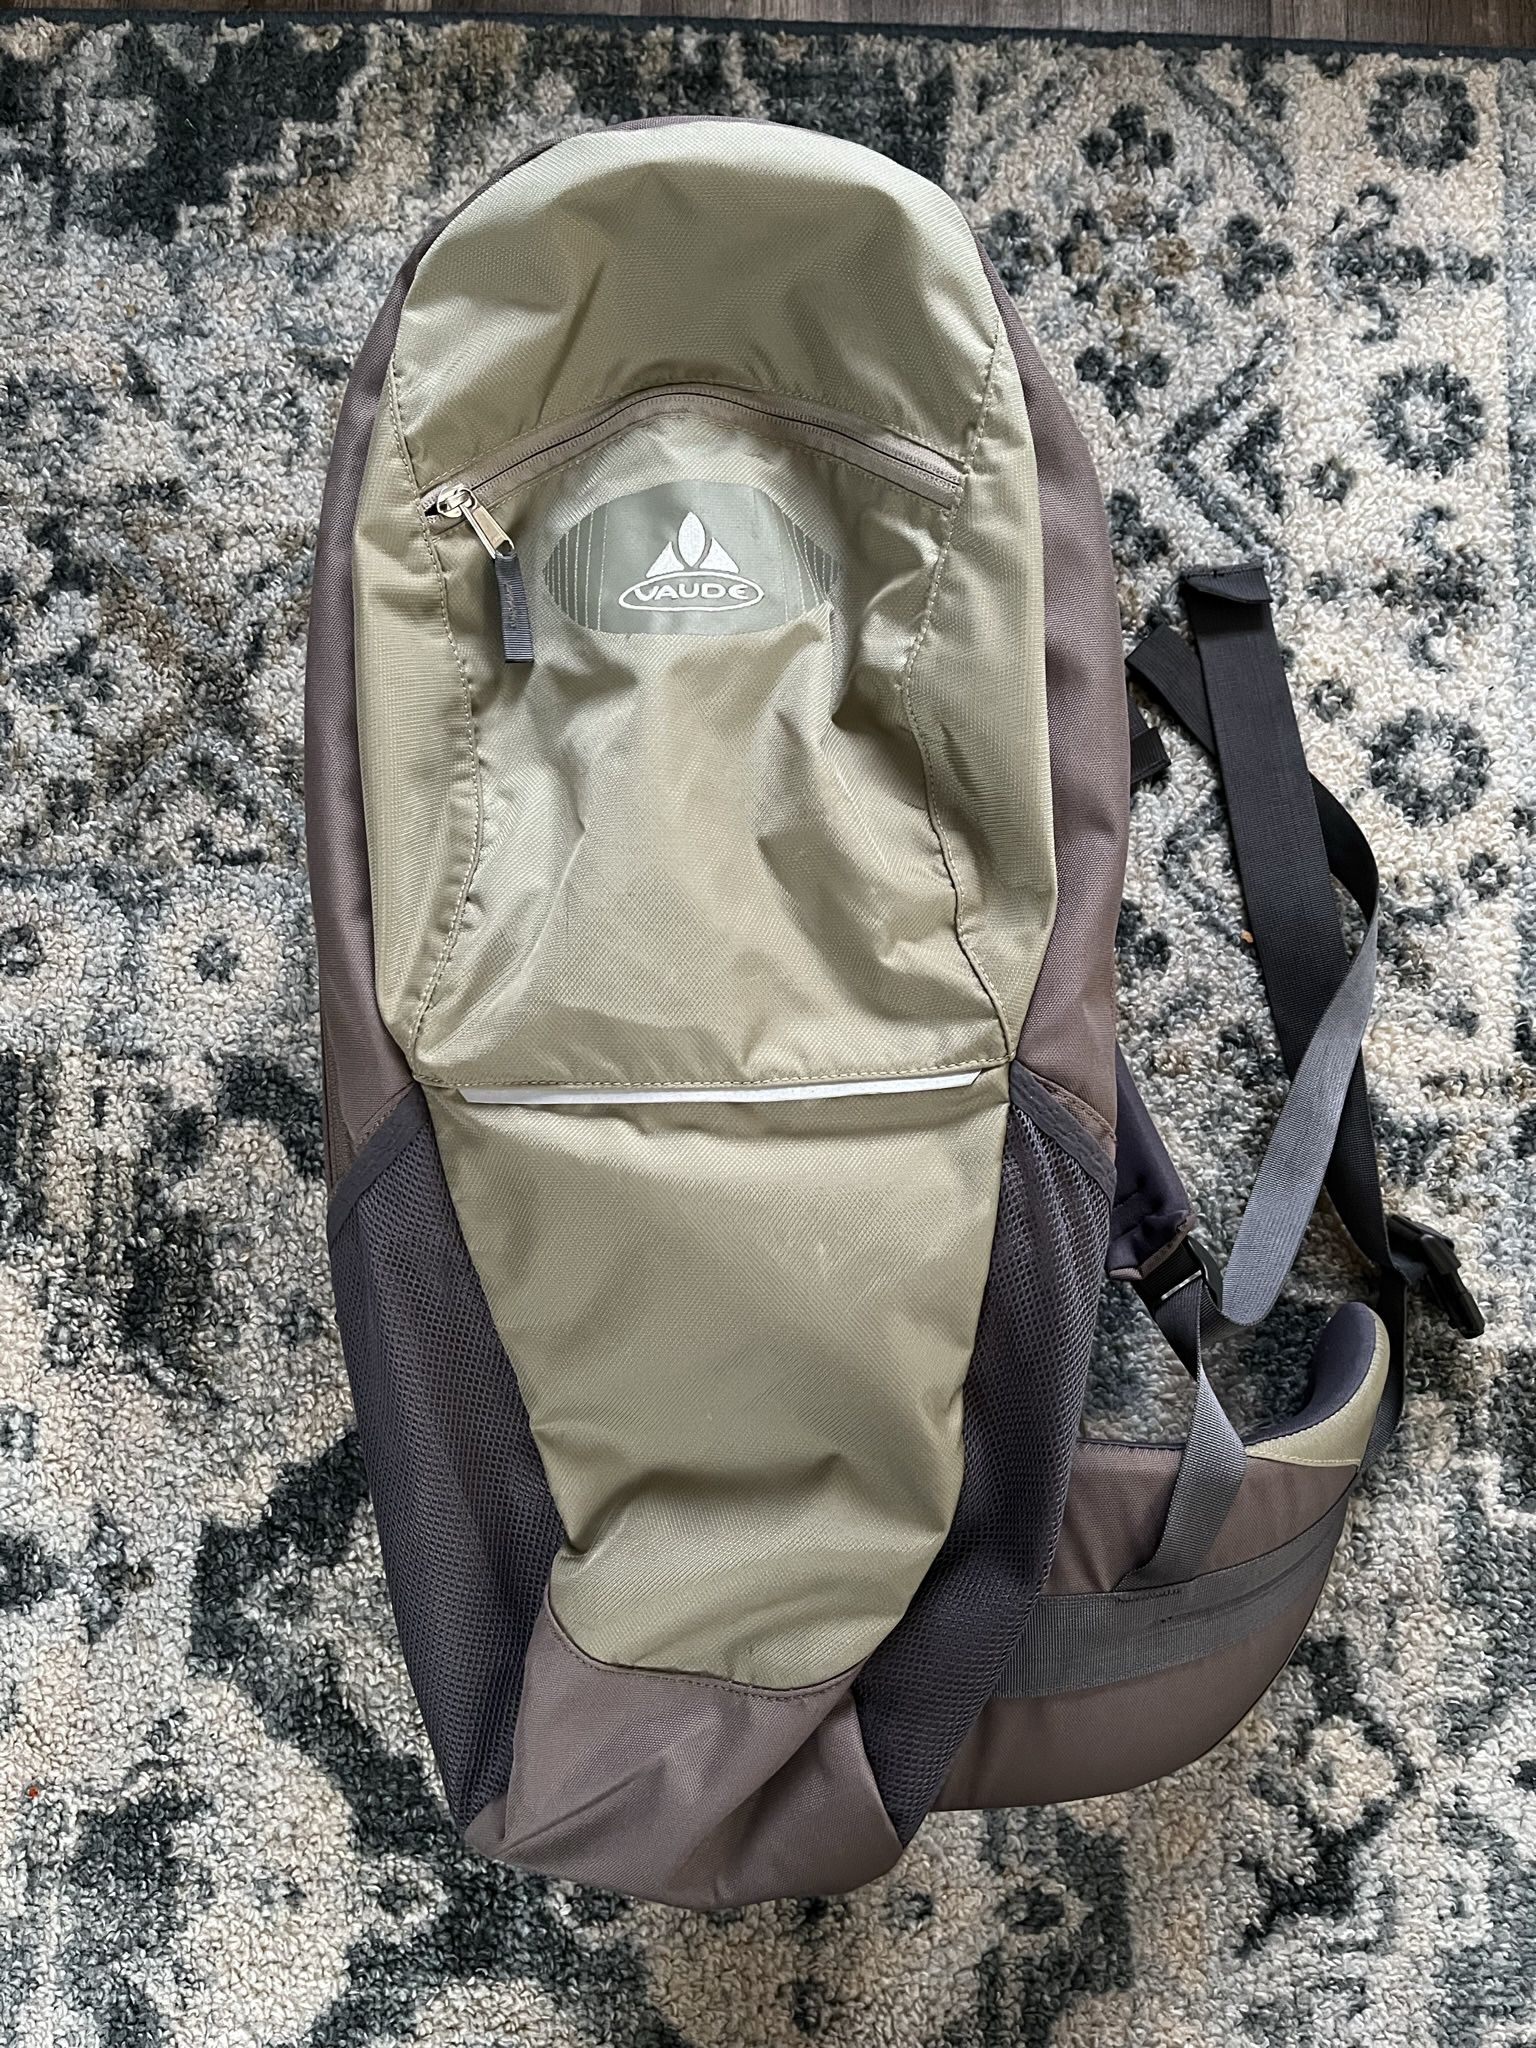 Baby/Toddler Carrier+Backpack For Hiking 